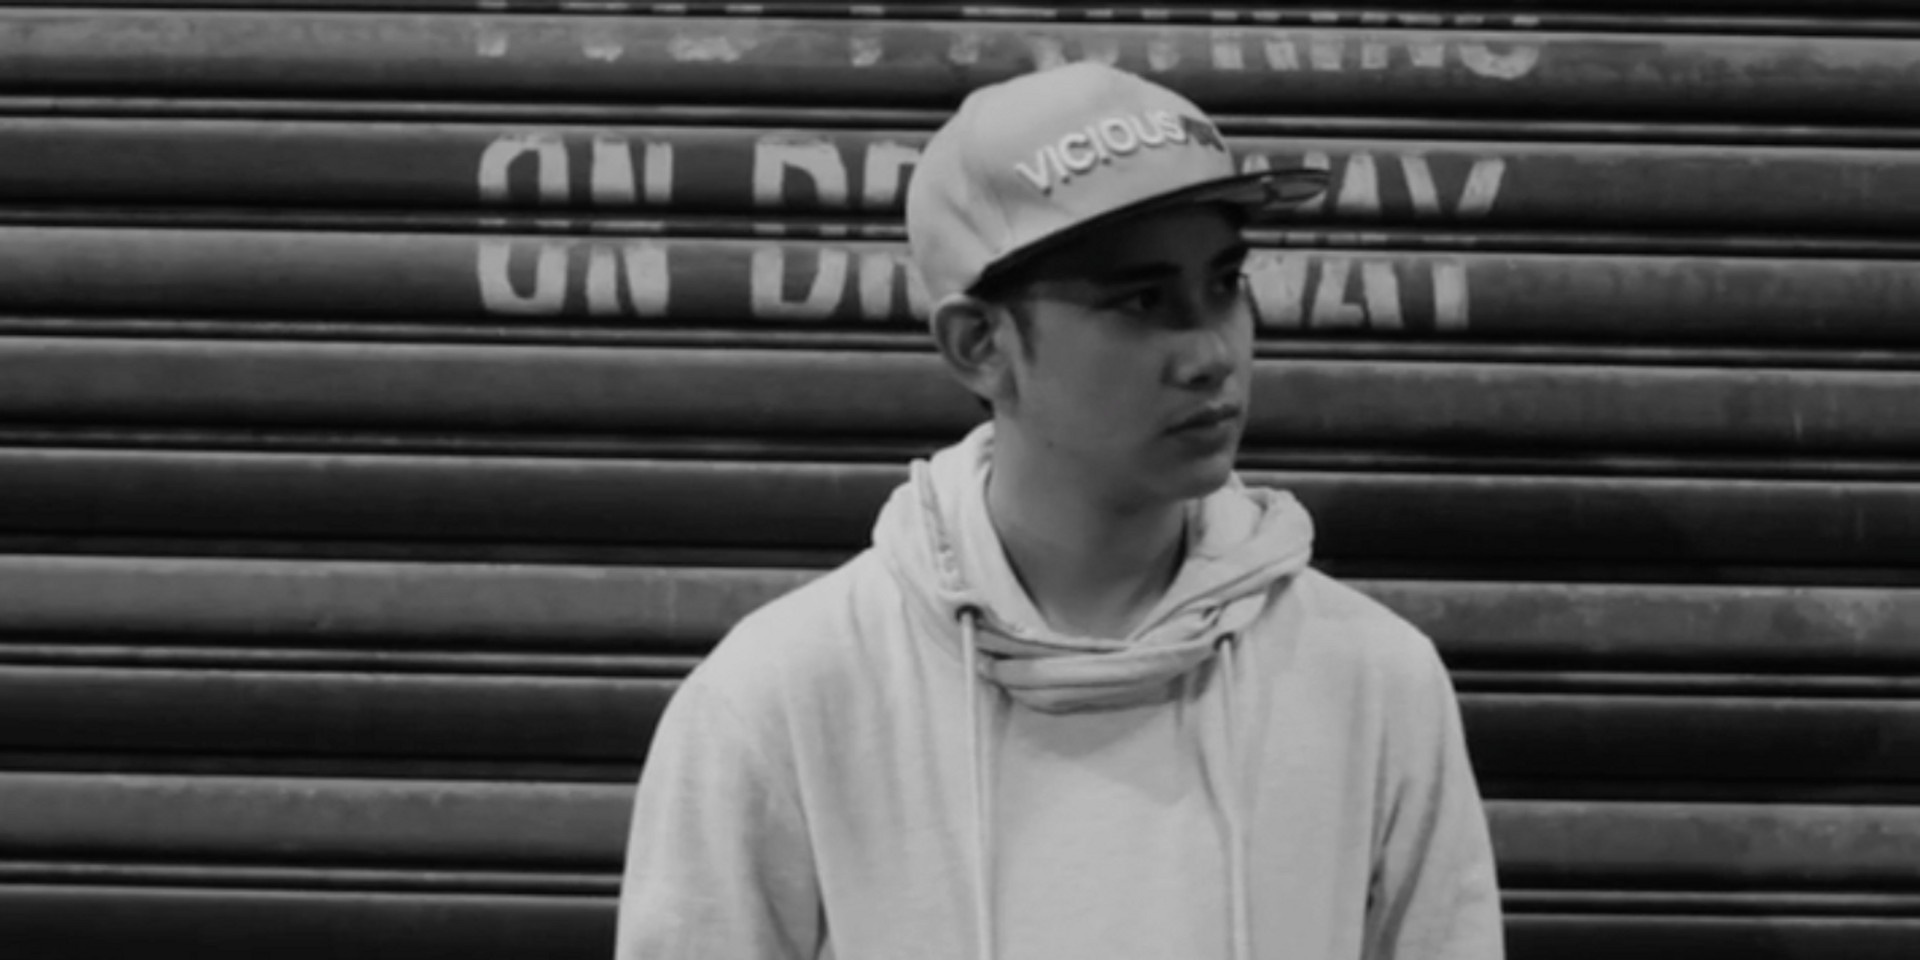 WATCH: NINNO delivers fresh perspective on the streets with TCK